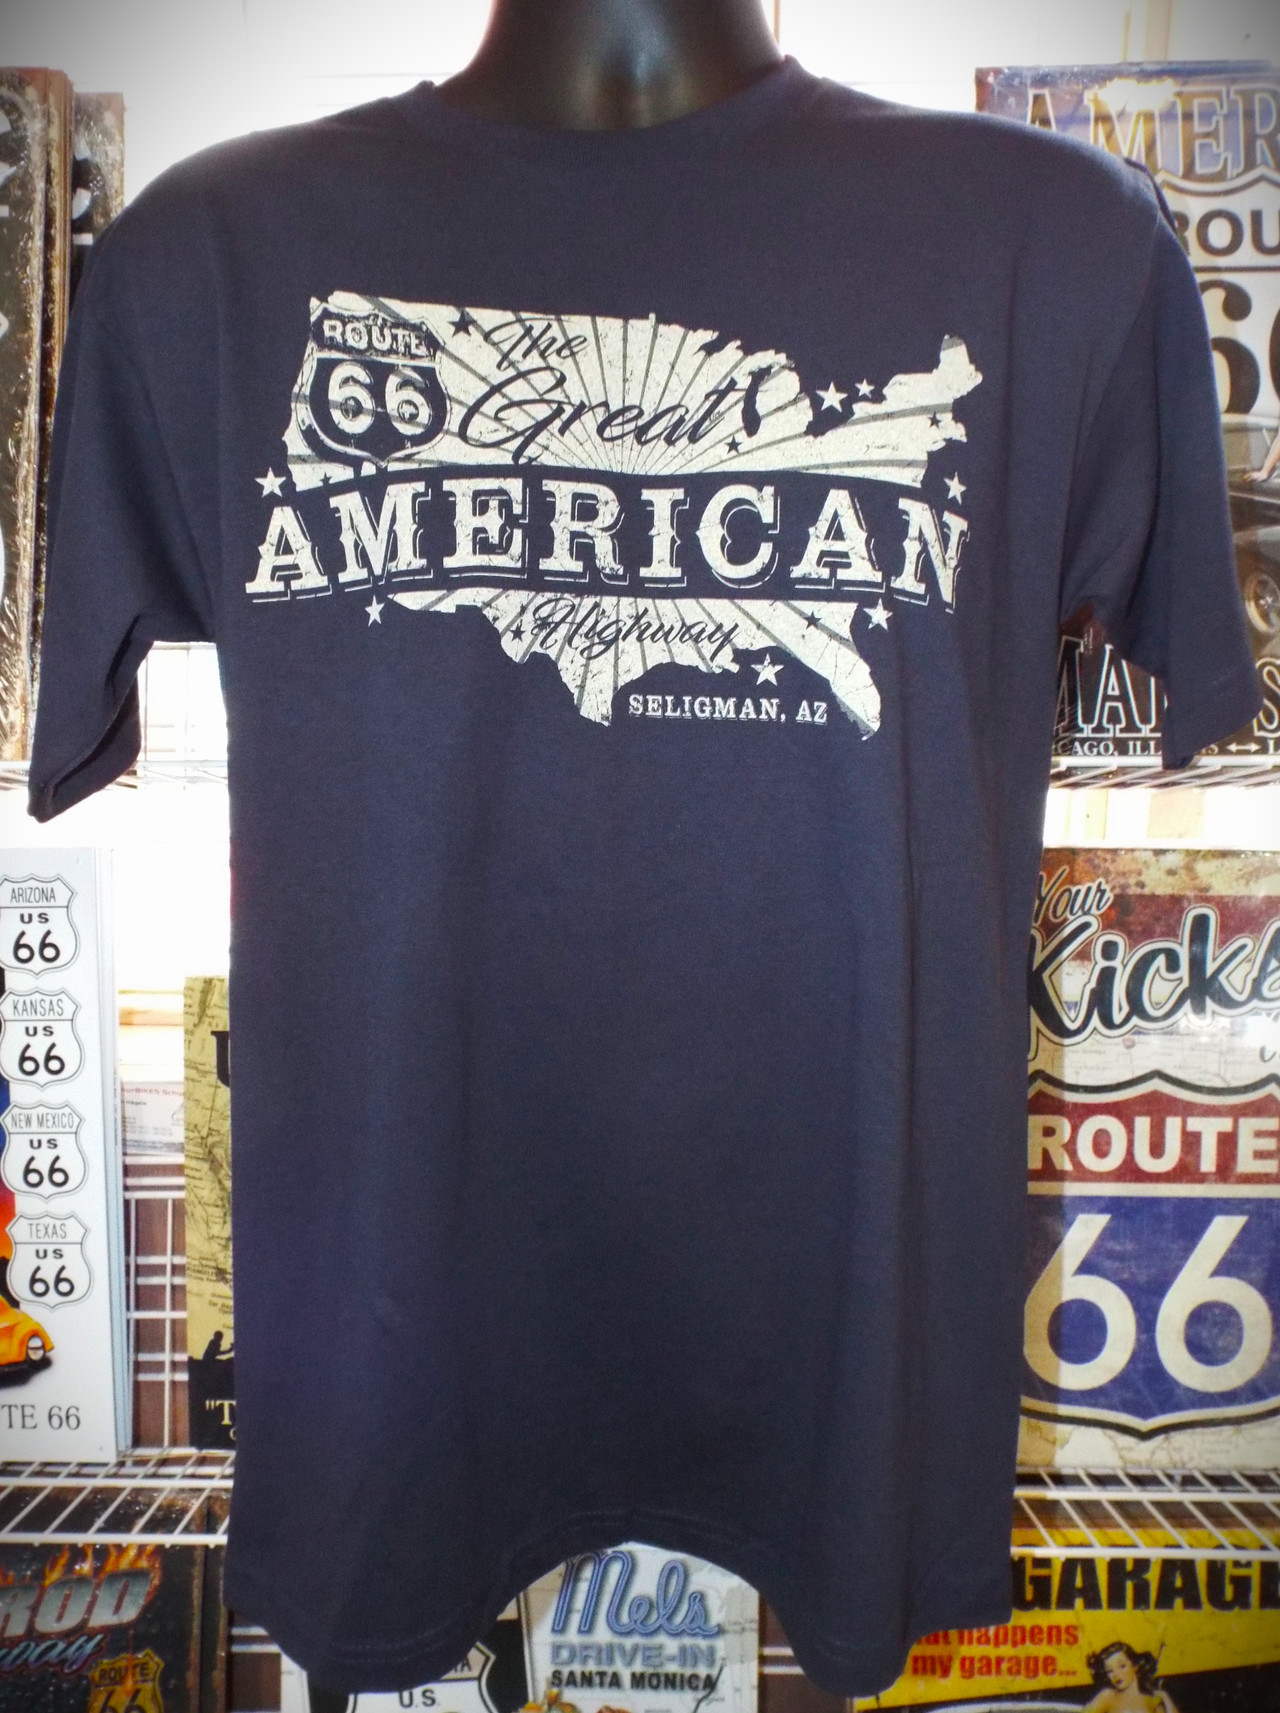 Route 66 Clothing Made in the USA